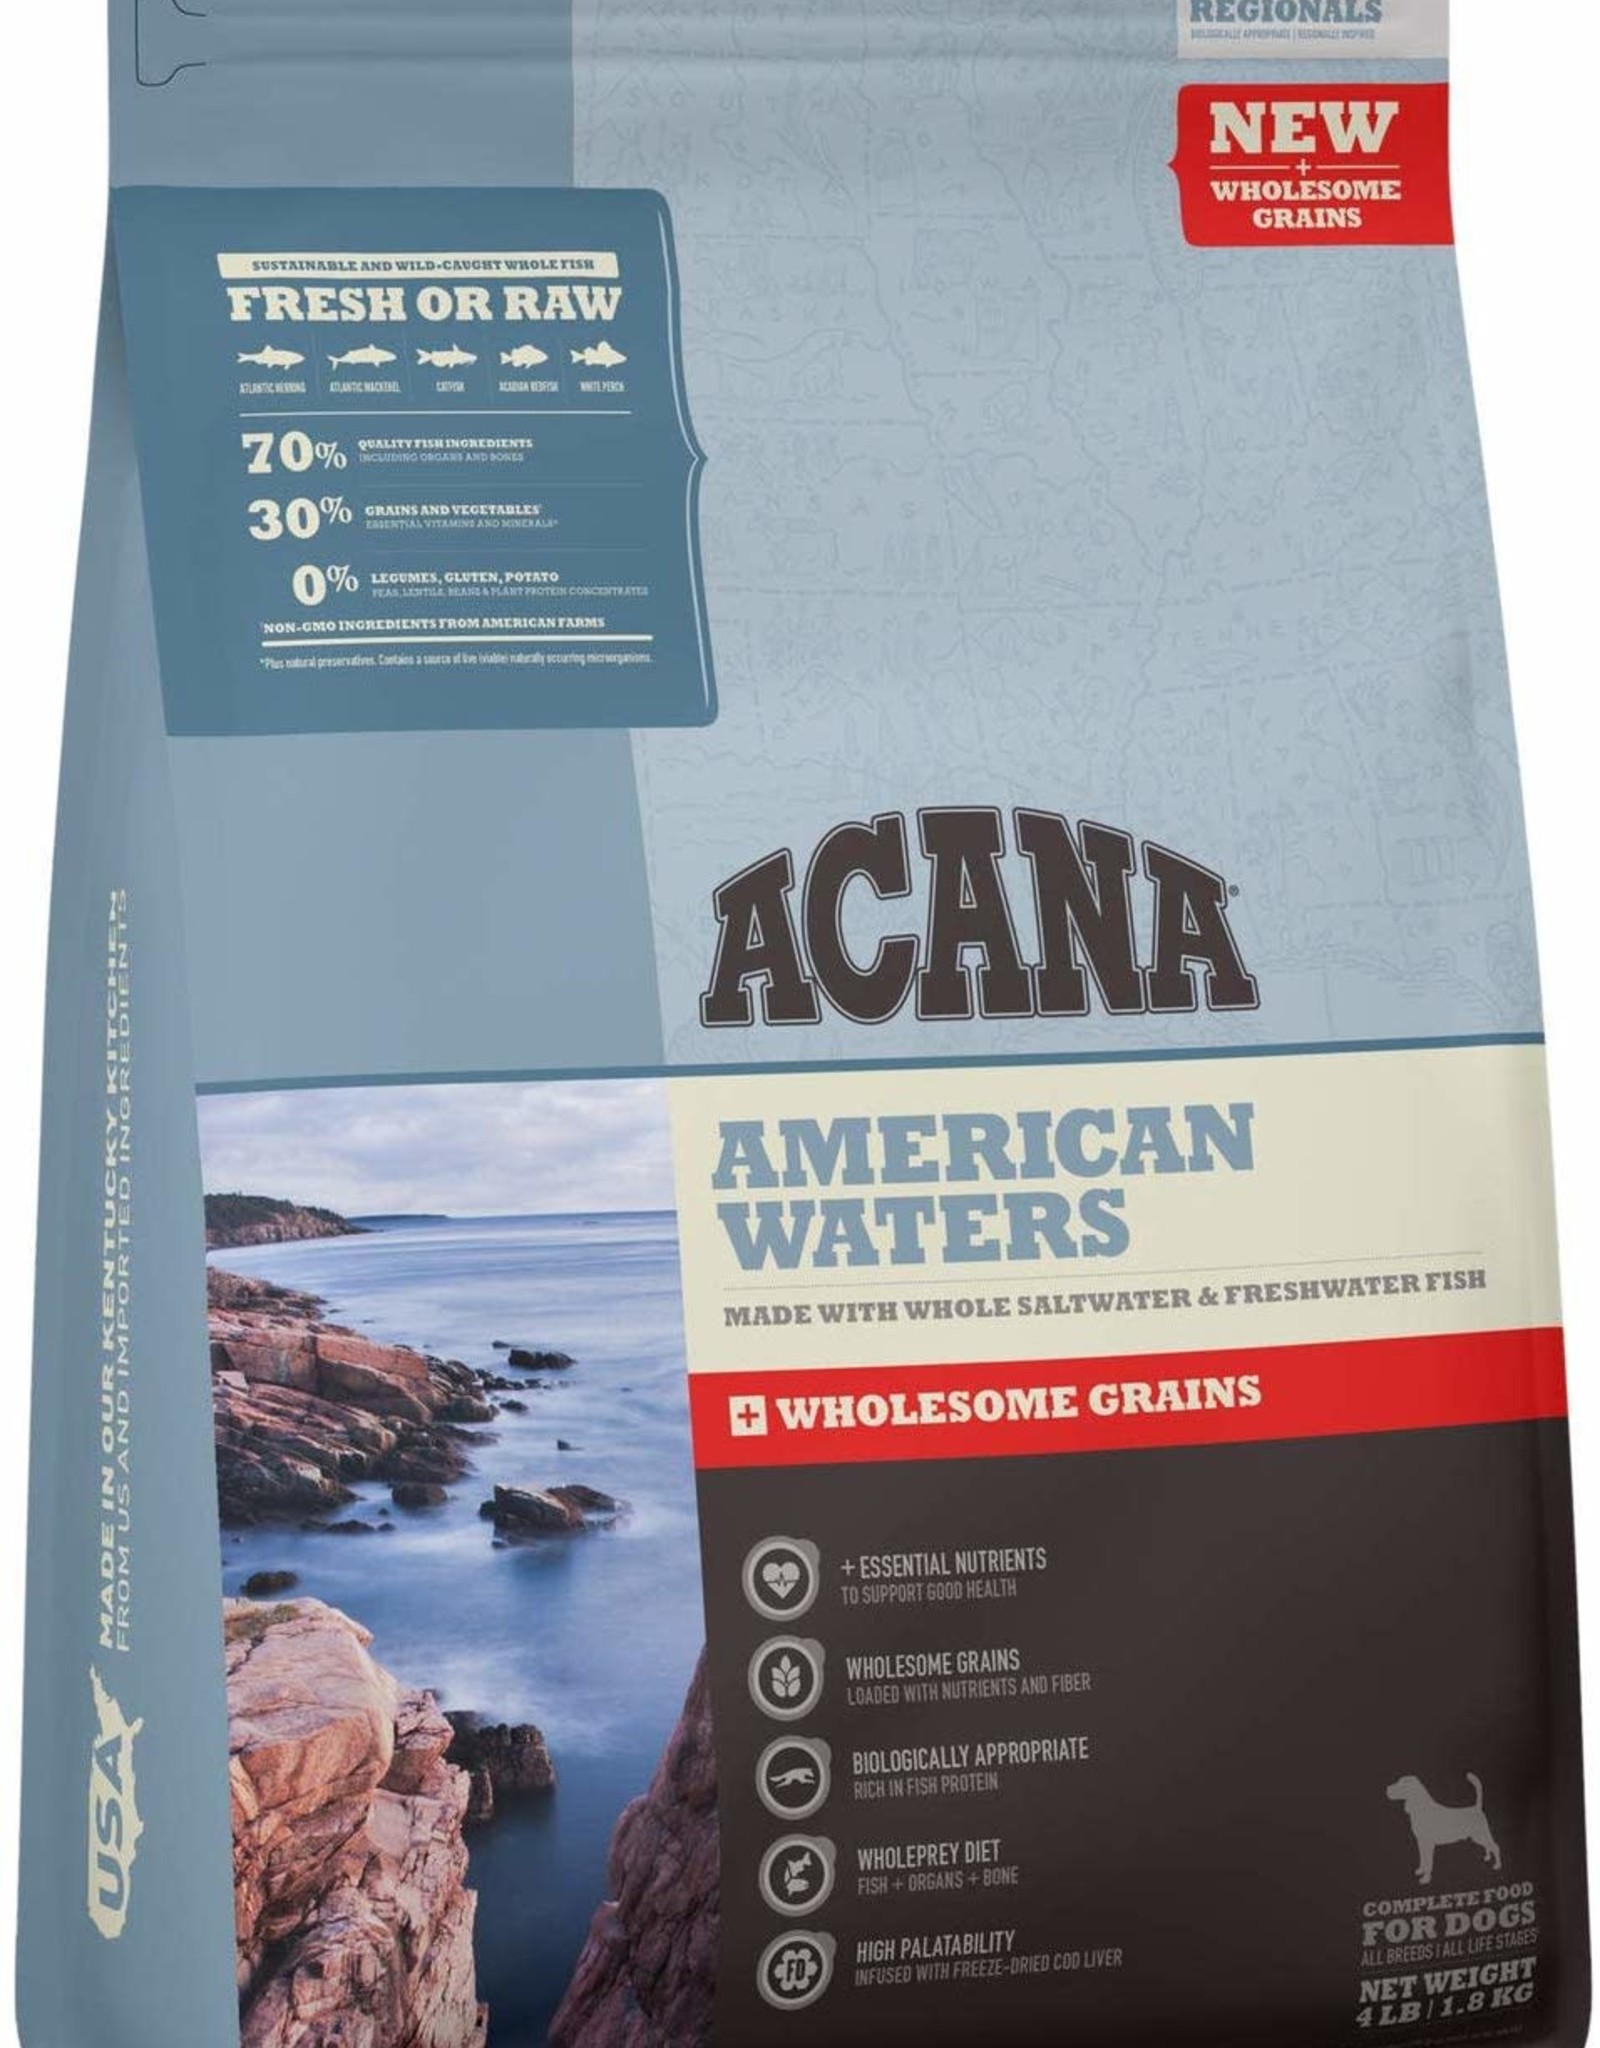 Champion Pet ACANA Regionals American Waters + Wholesome Grains, 4lb